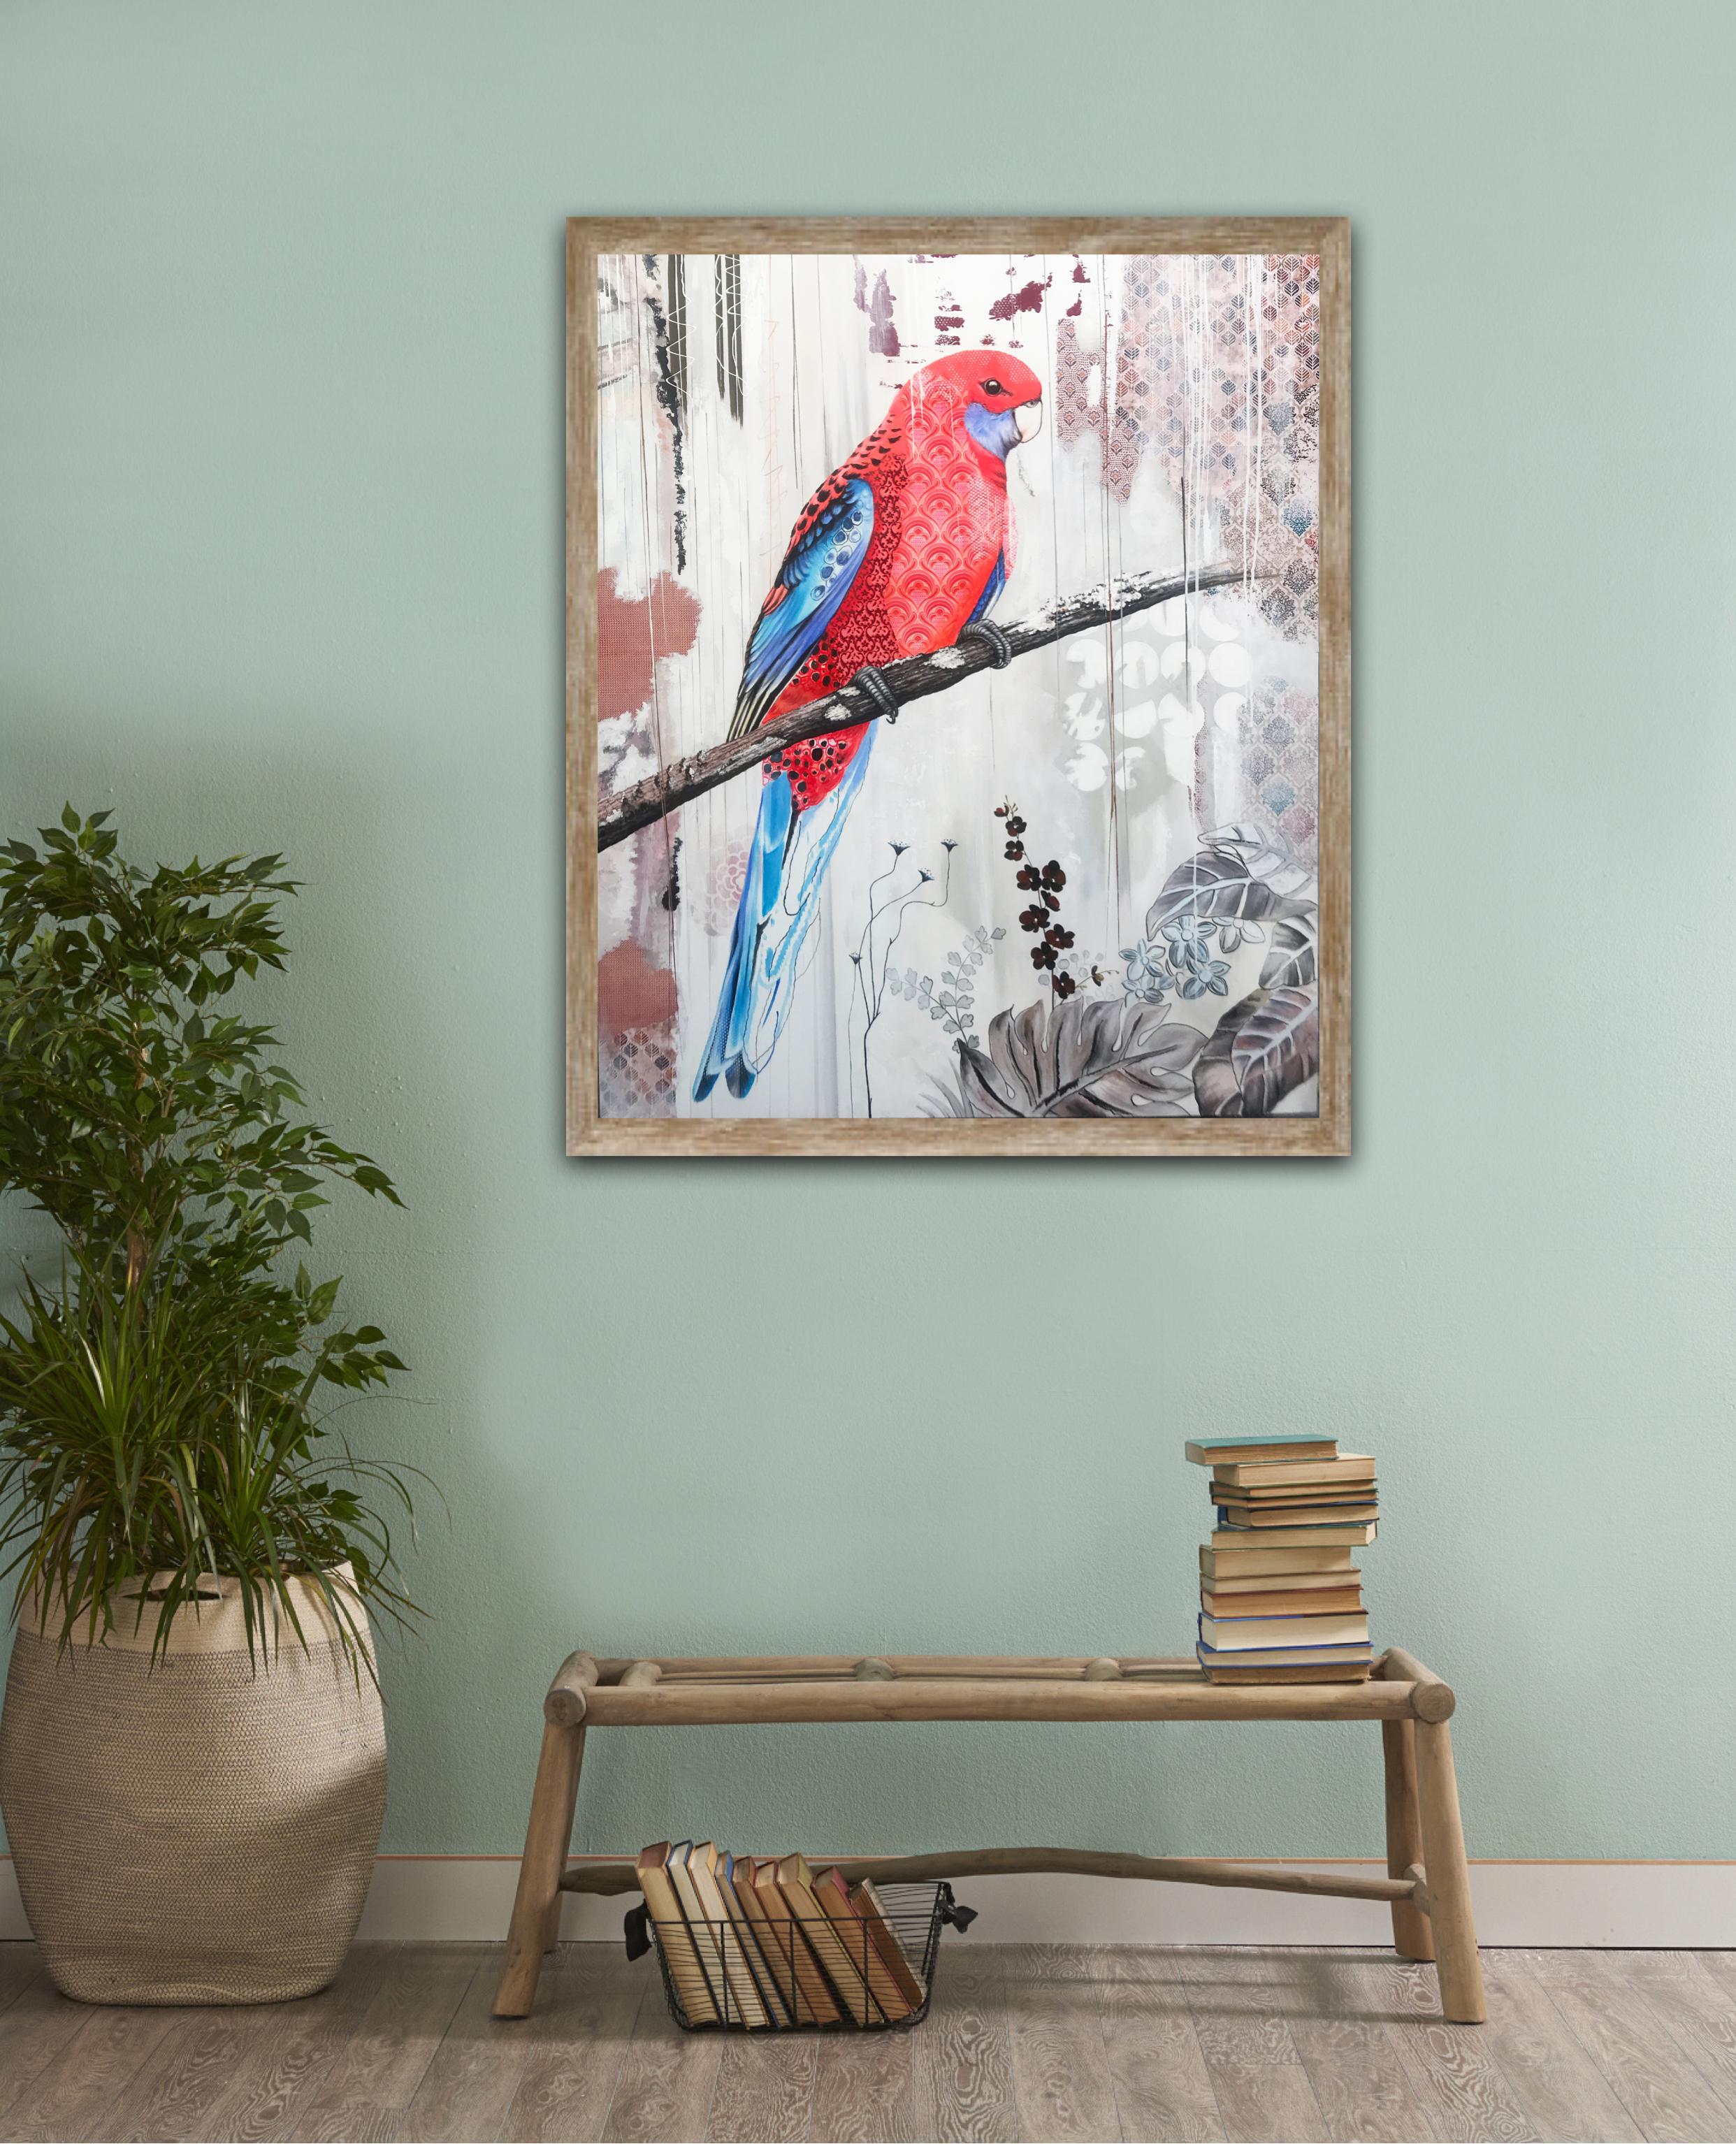 Rosella - Contemporary Painting by Irene Hoff